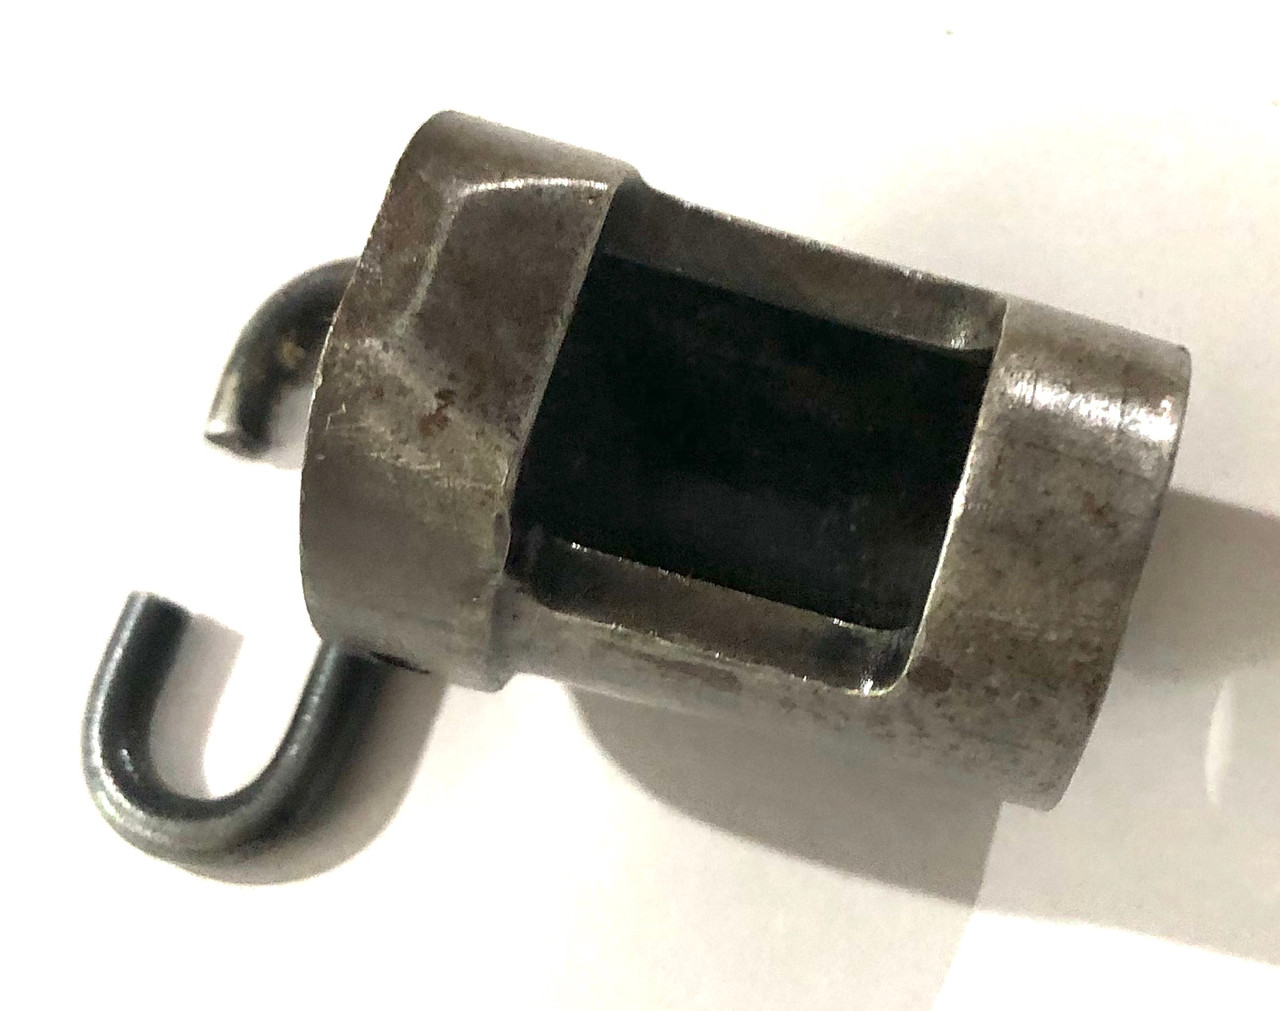 4: CAP, nose, No.3 Assembly With Stacking Swivel (Unmarked) - Low Grade Condition